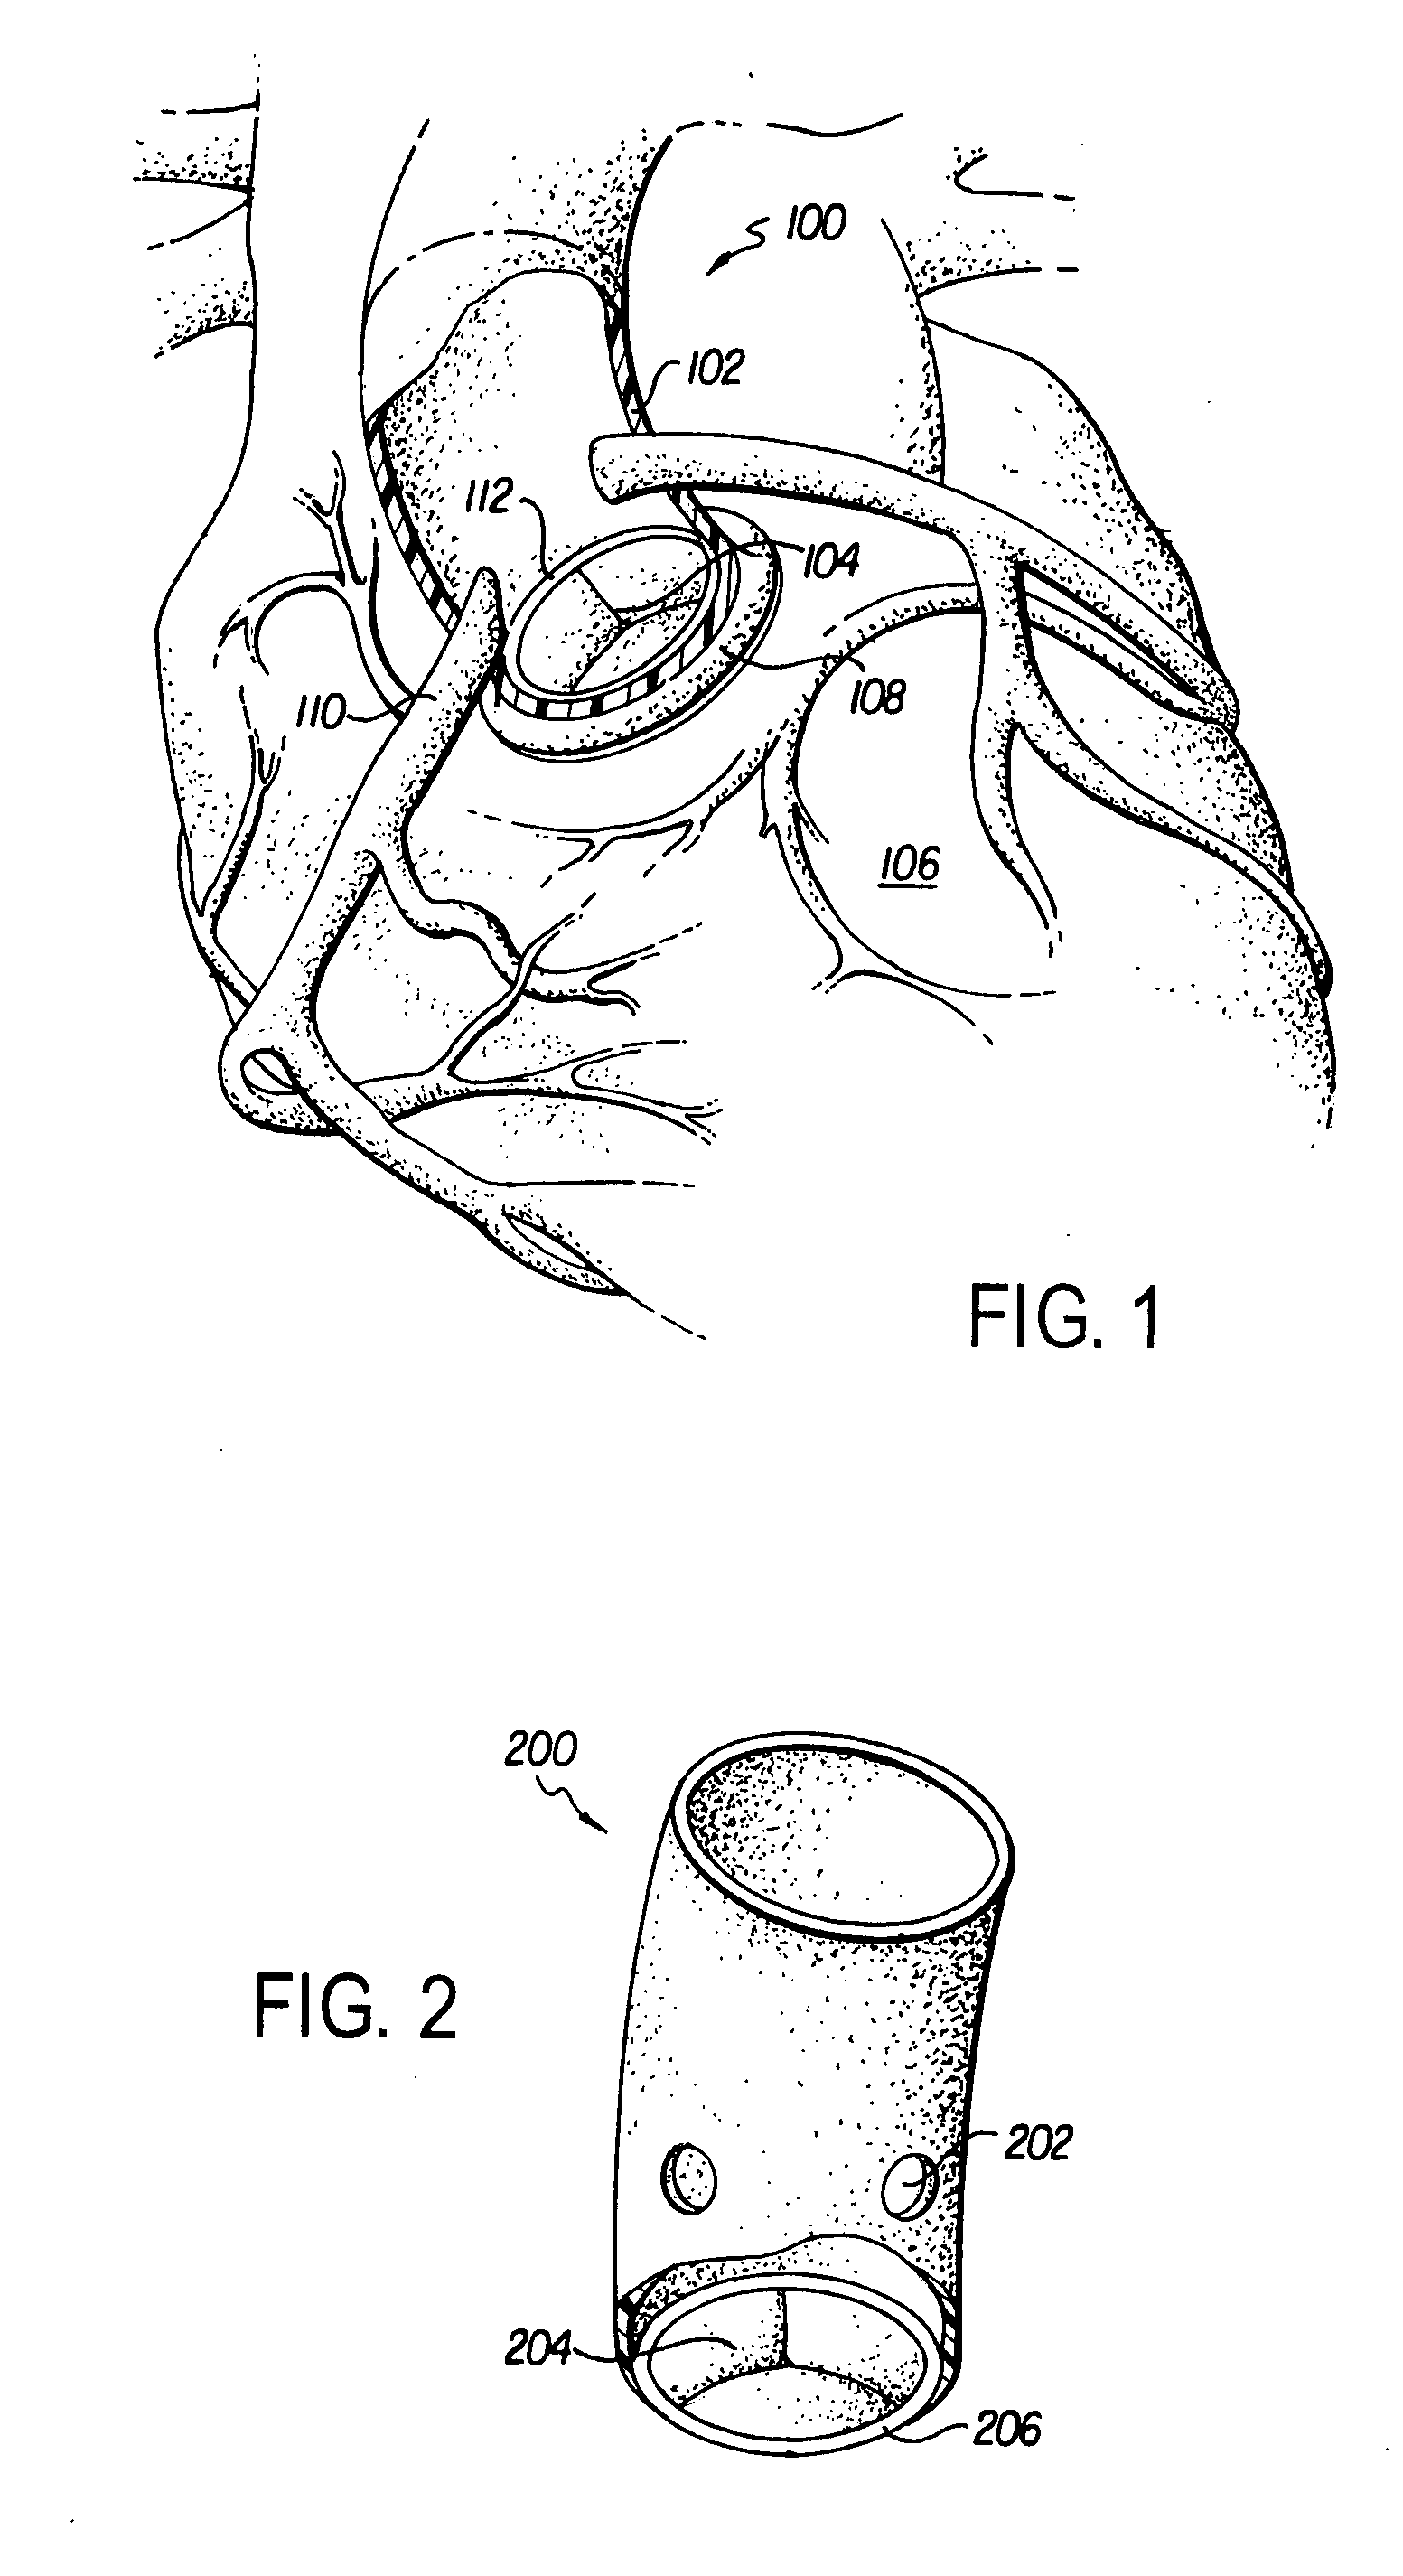 Heart model for training or demonstrating heart valve replacement or repair